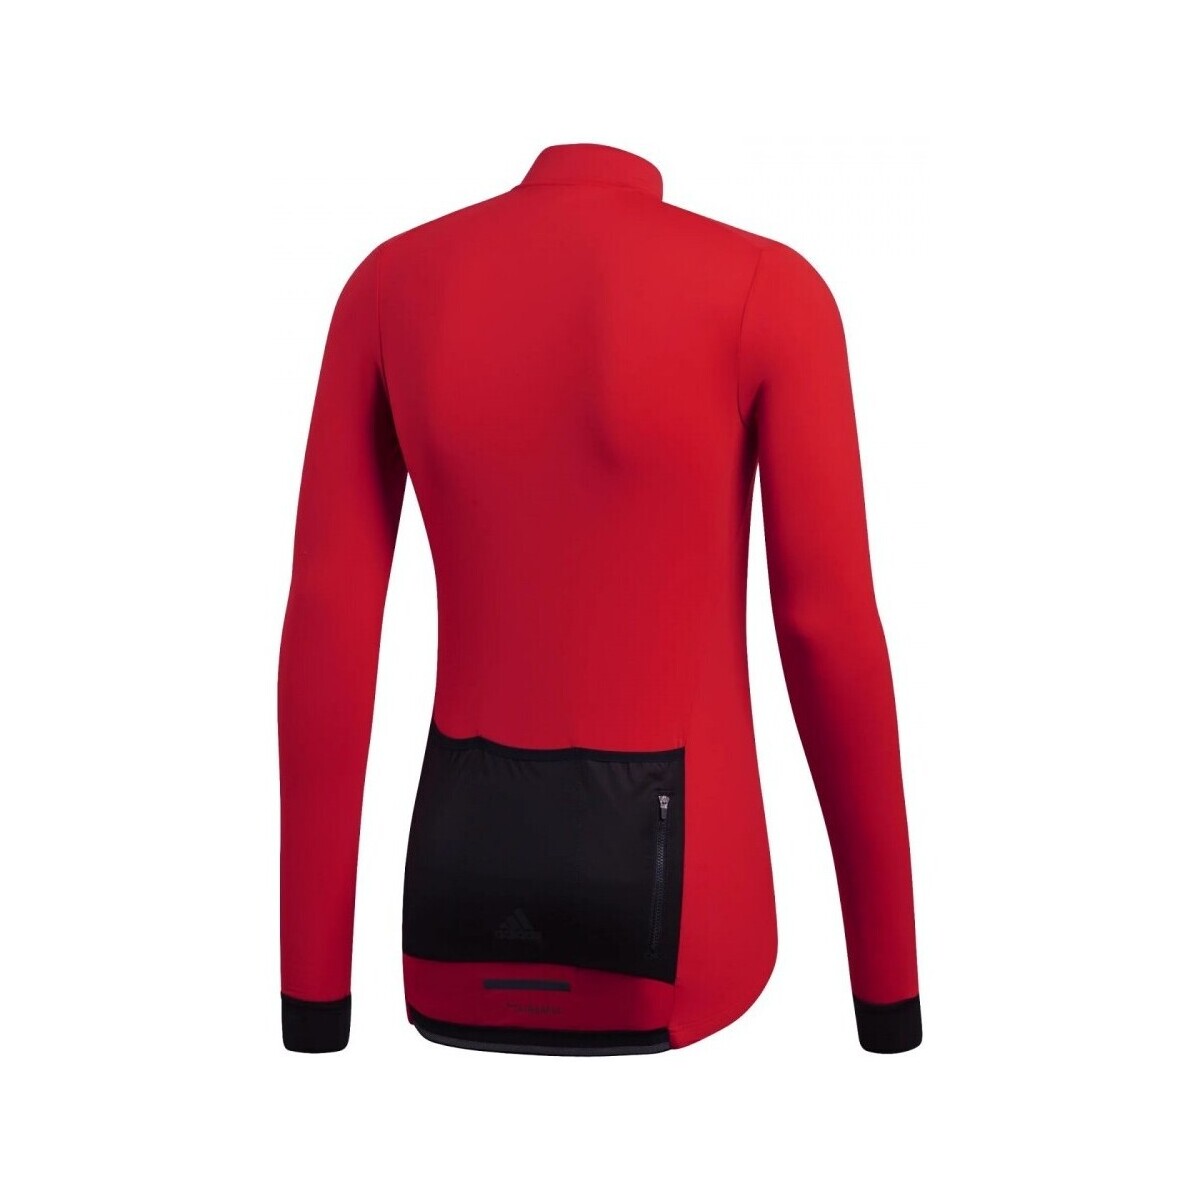 adidas Originals Rouge Climaheat Cycling Jersey qPY453ZC